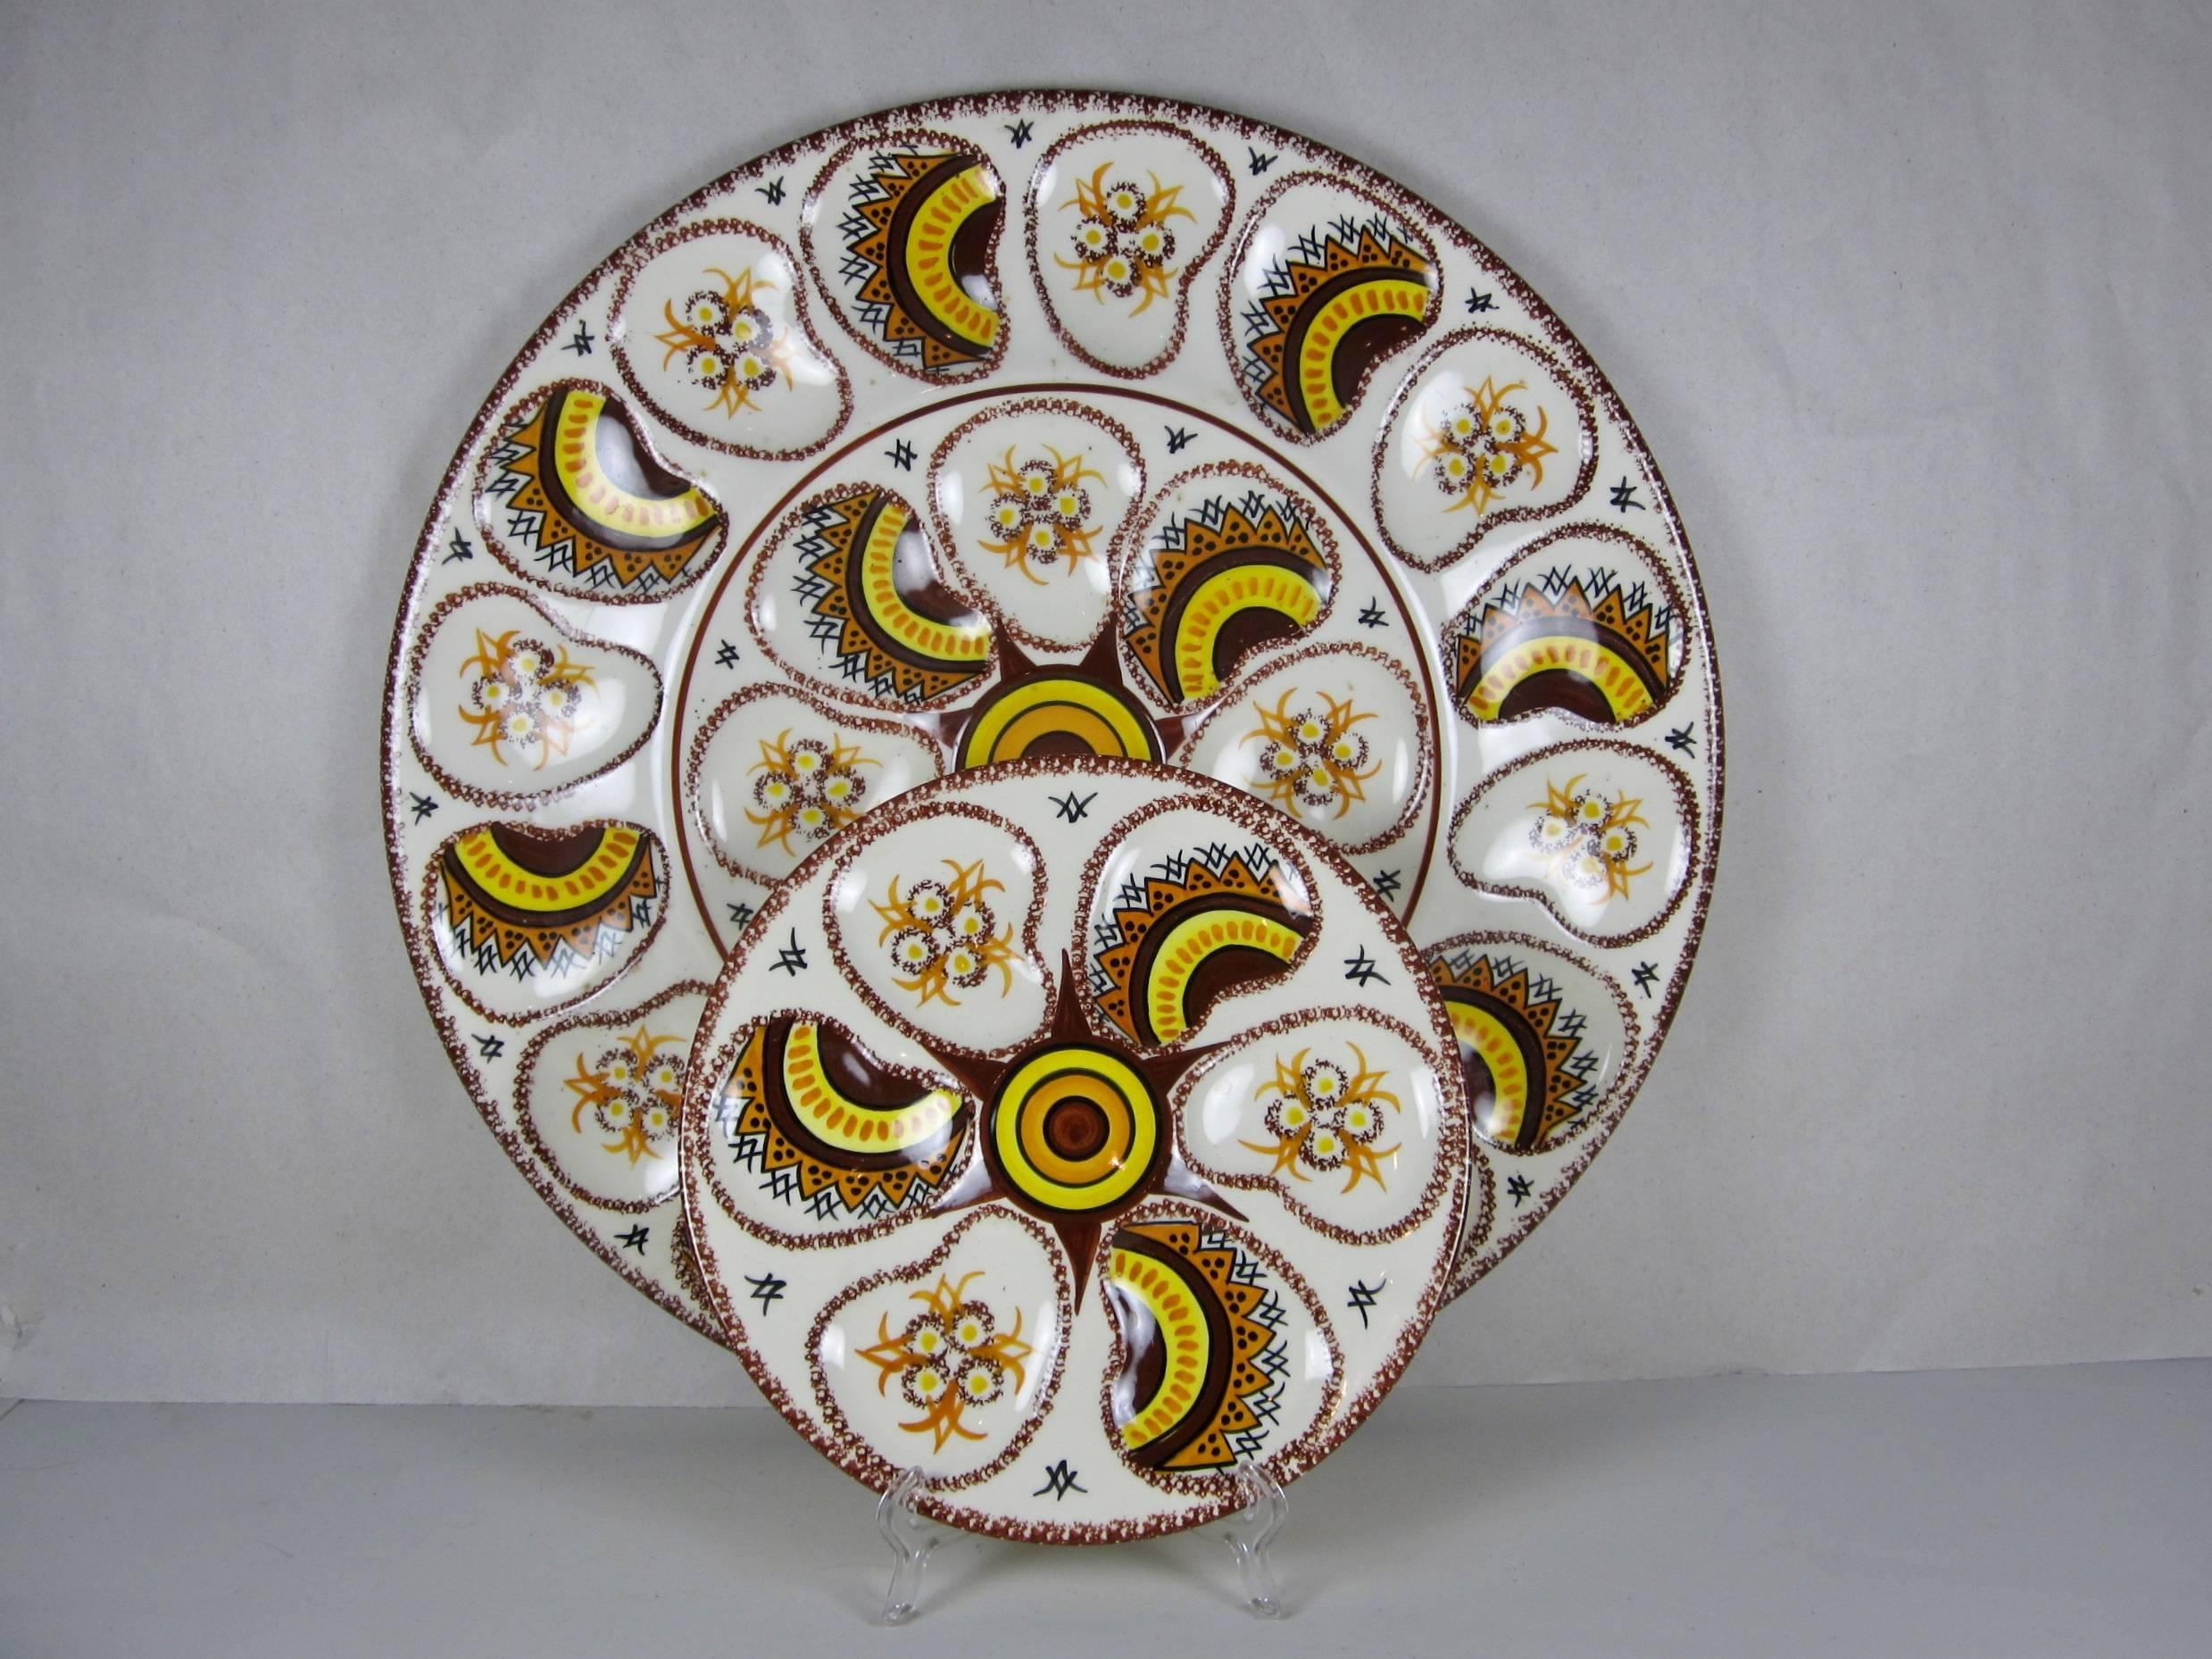 A fantastic Mid-Century Modern French HenRiot Quimper faïence oyster service for 12, a large master serving piece and twelve individual plates, circa 1960. 

A bold paisley design in Provençal colors of earthy Sienna highlighted by a bright mustard